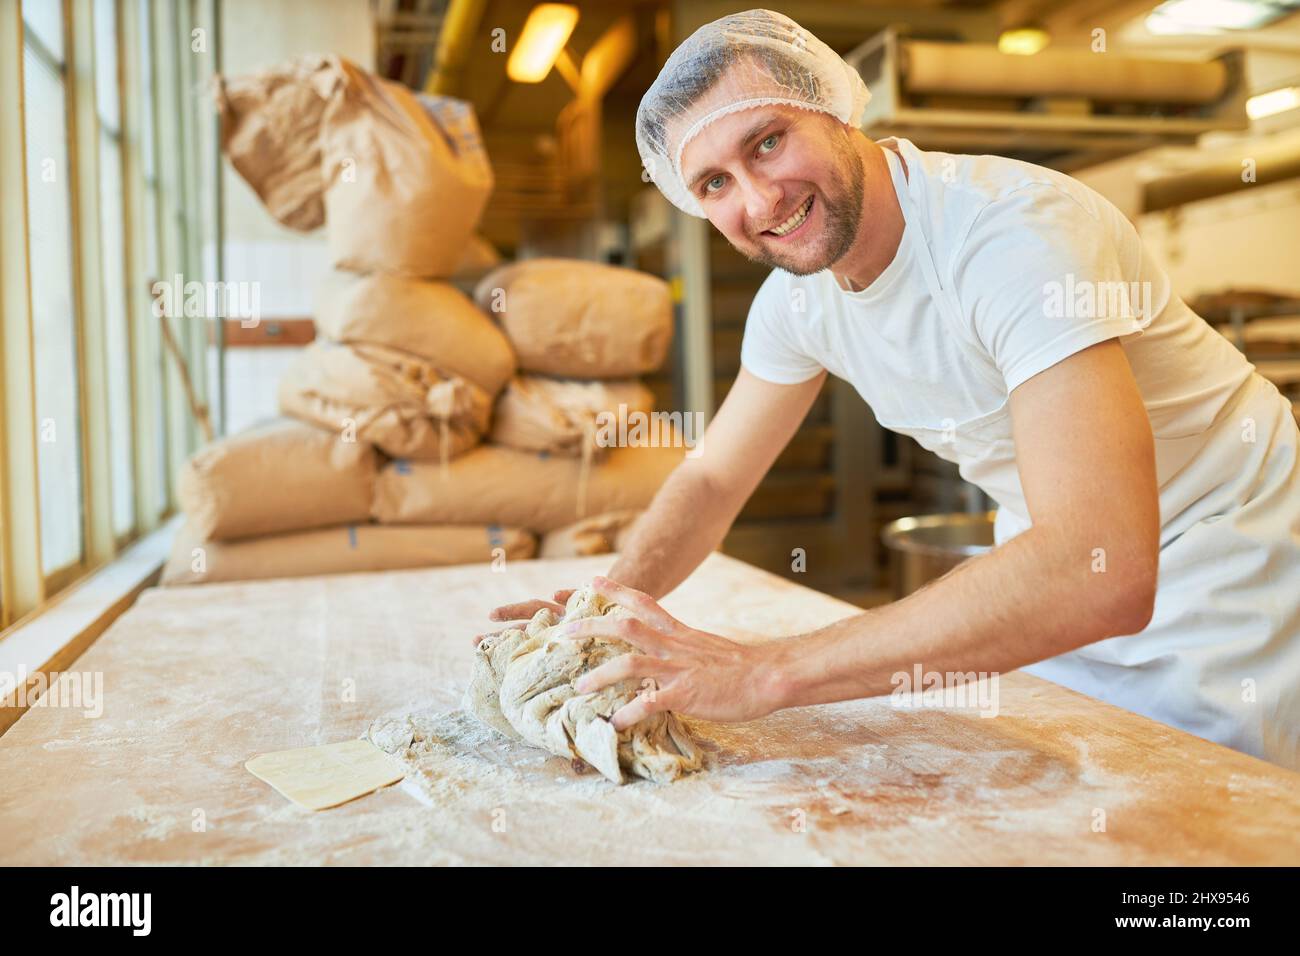 Young baker kneads dough as work step and preparation for baking bread in bakery Stock Photo